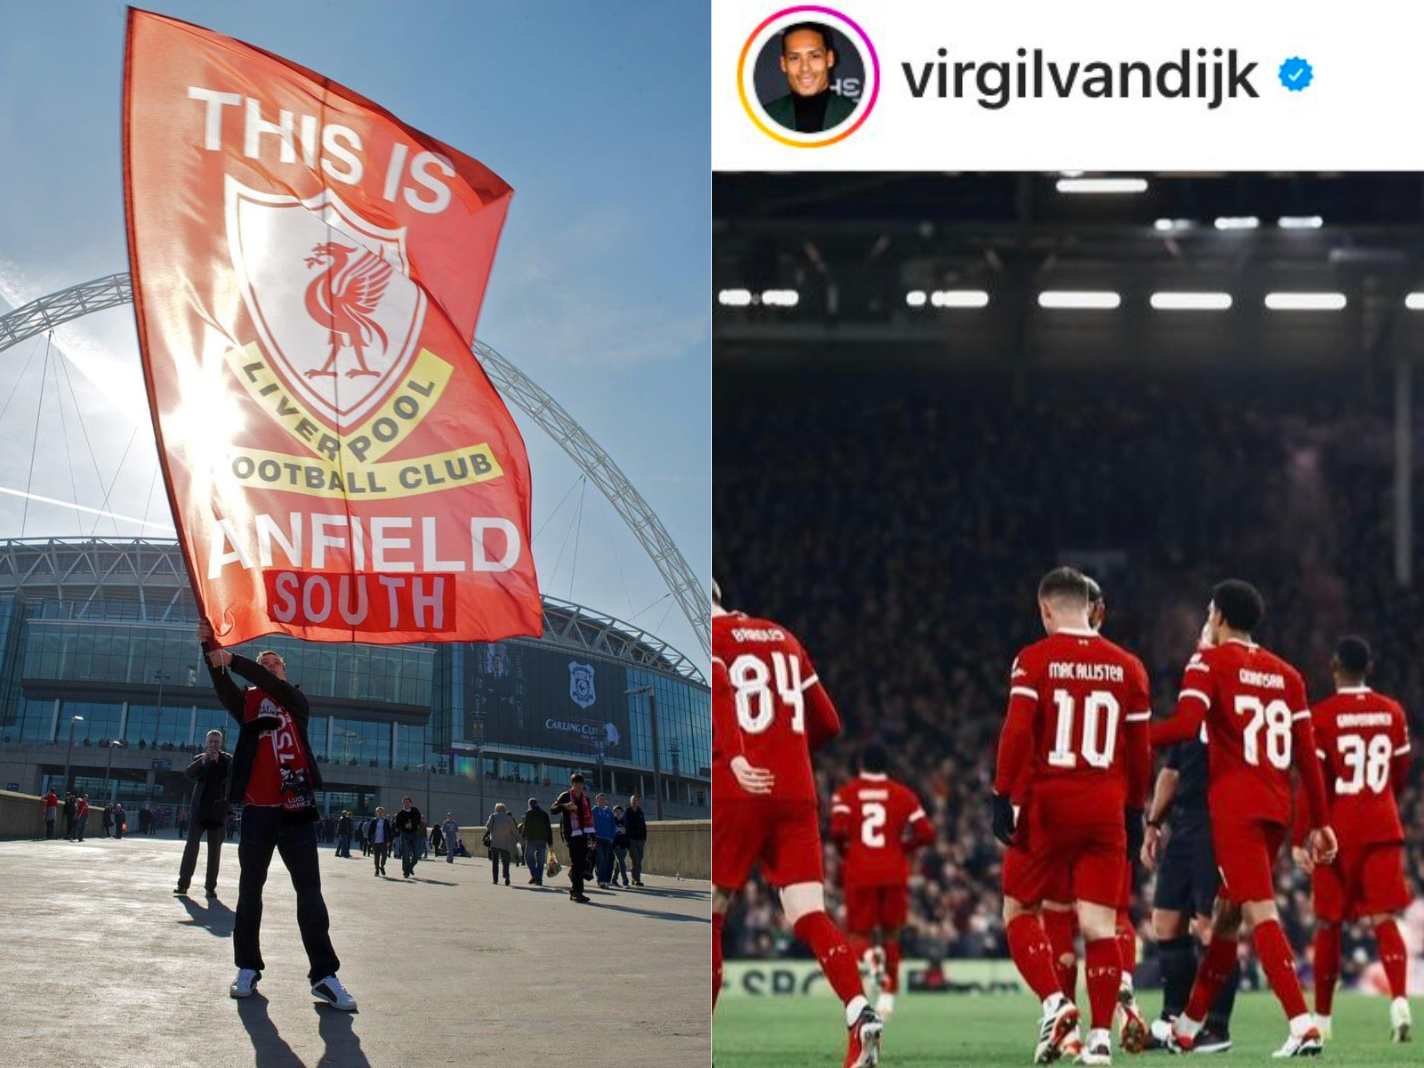 Why Virgil van Dijk Referred to Wembley as ‘Anfield South’ on Insta